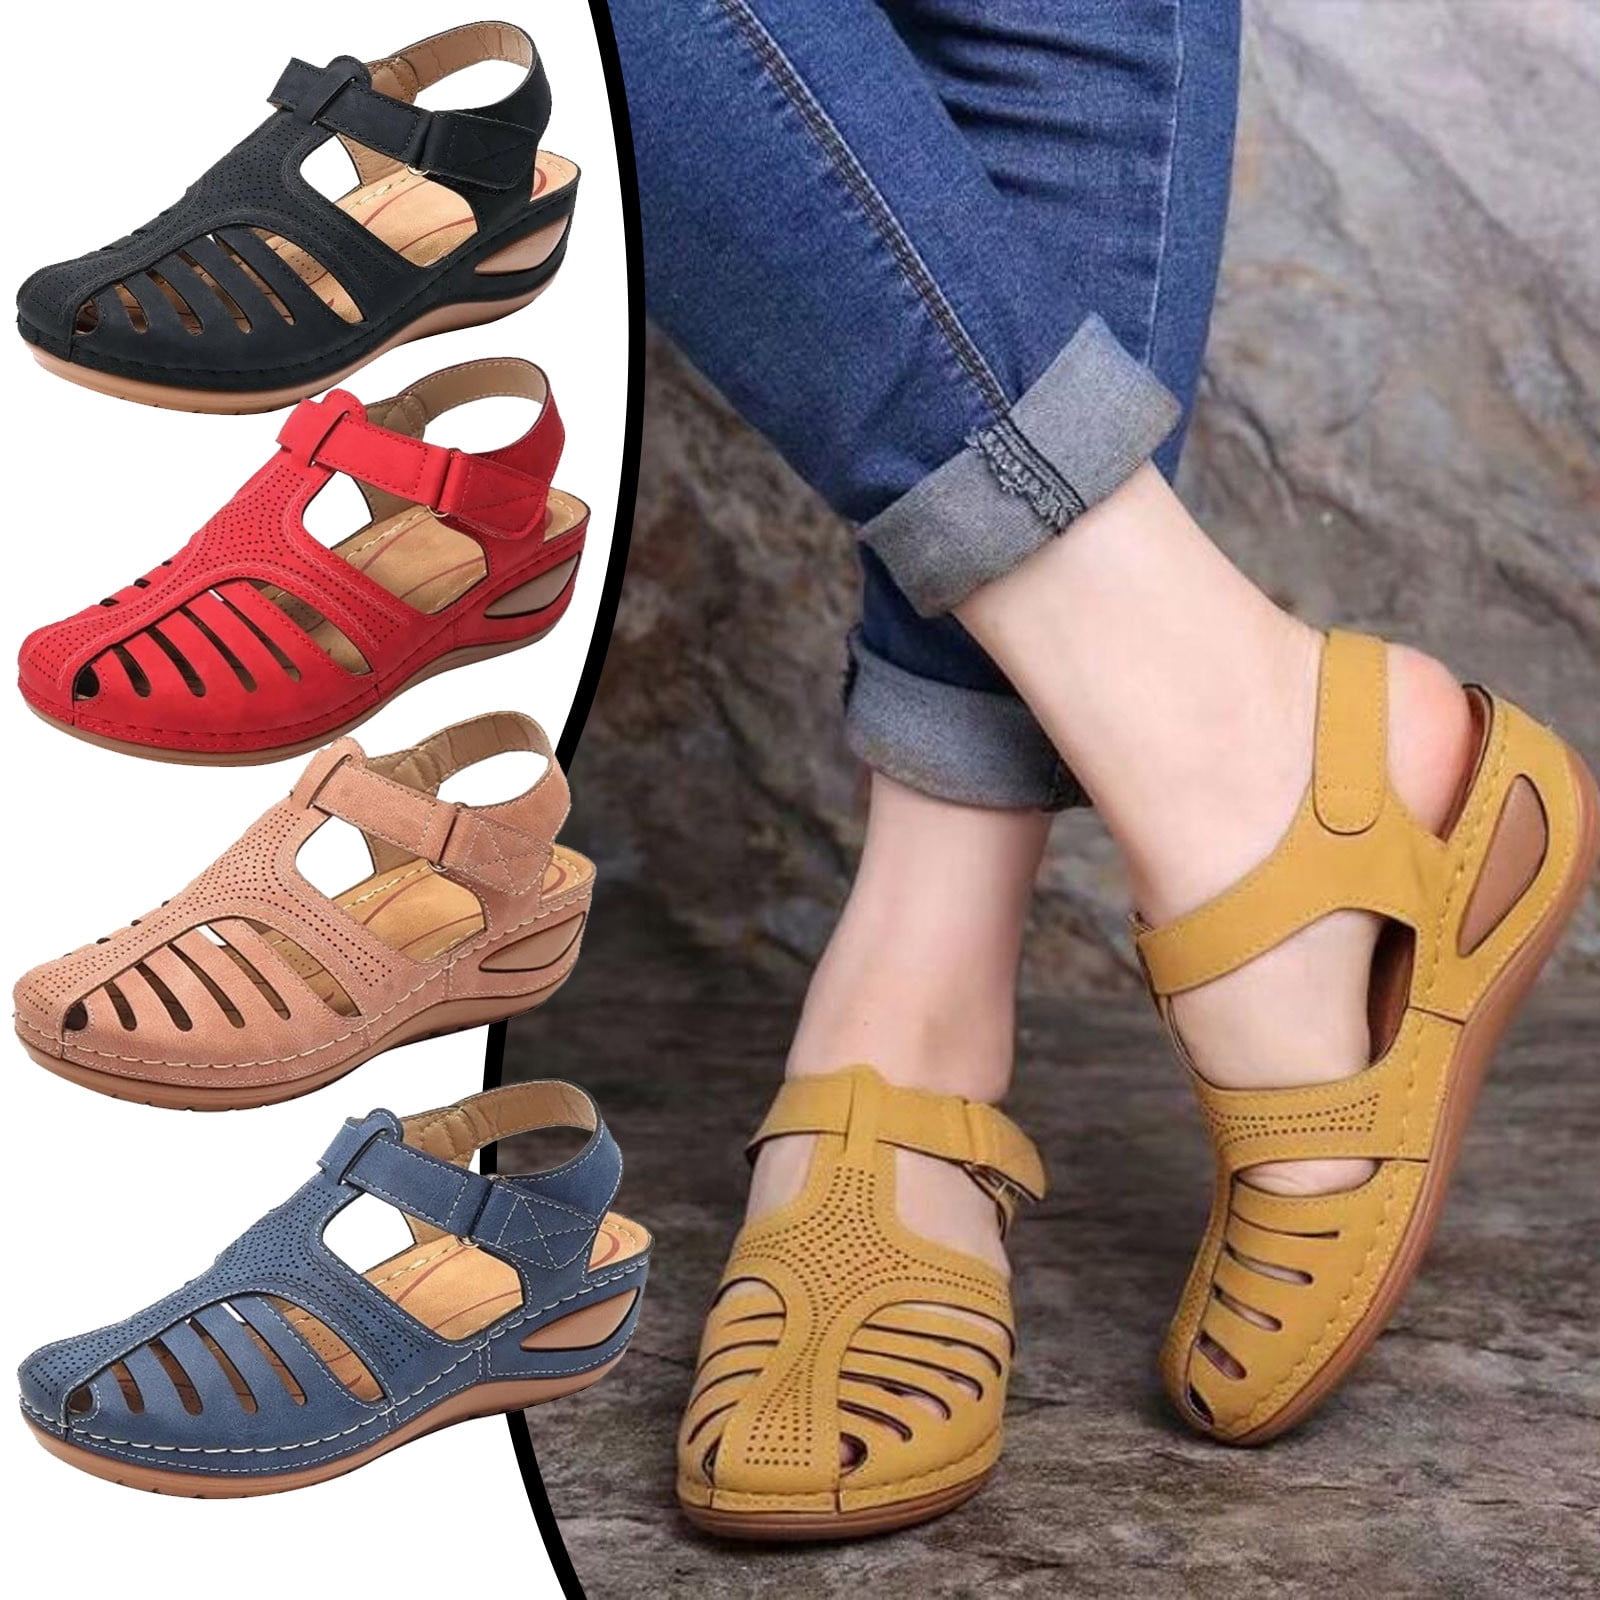 Women's Wedge Heel Shoes Round Toe Platform Slip on Suede Comfy College Loafers 